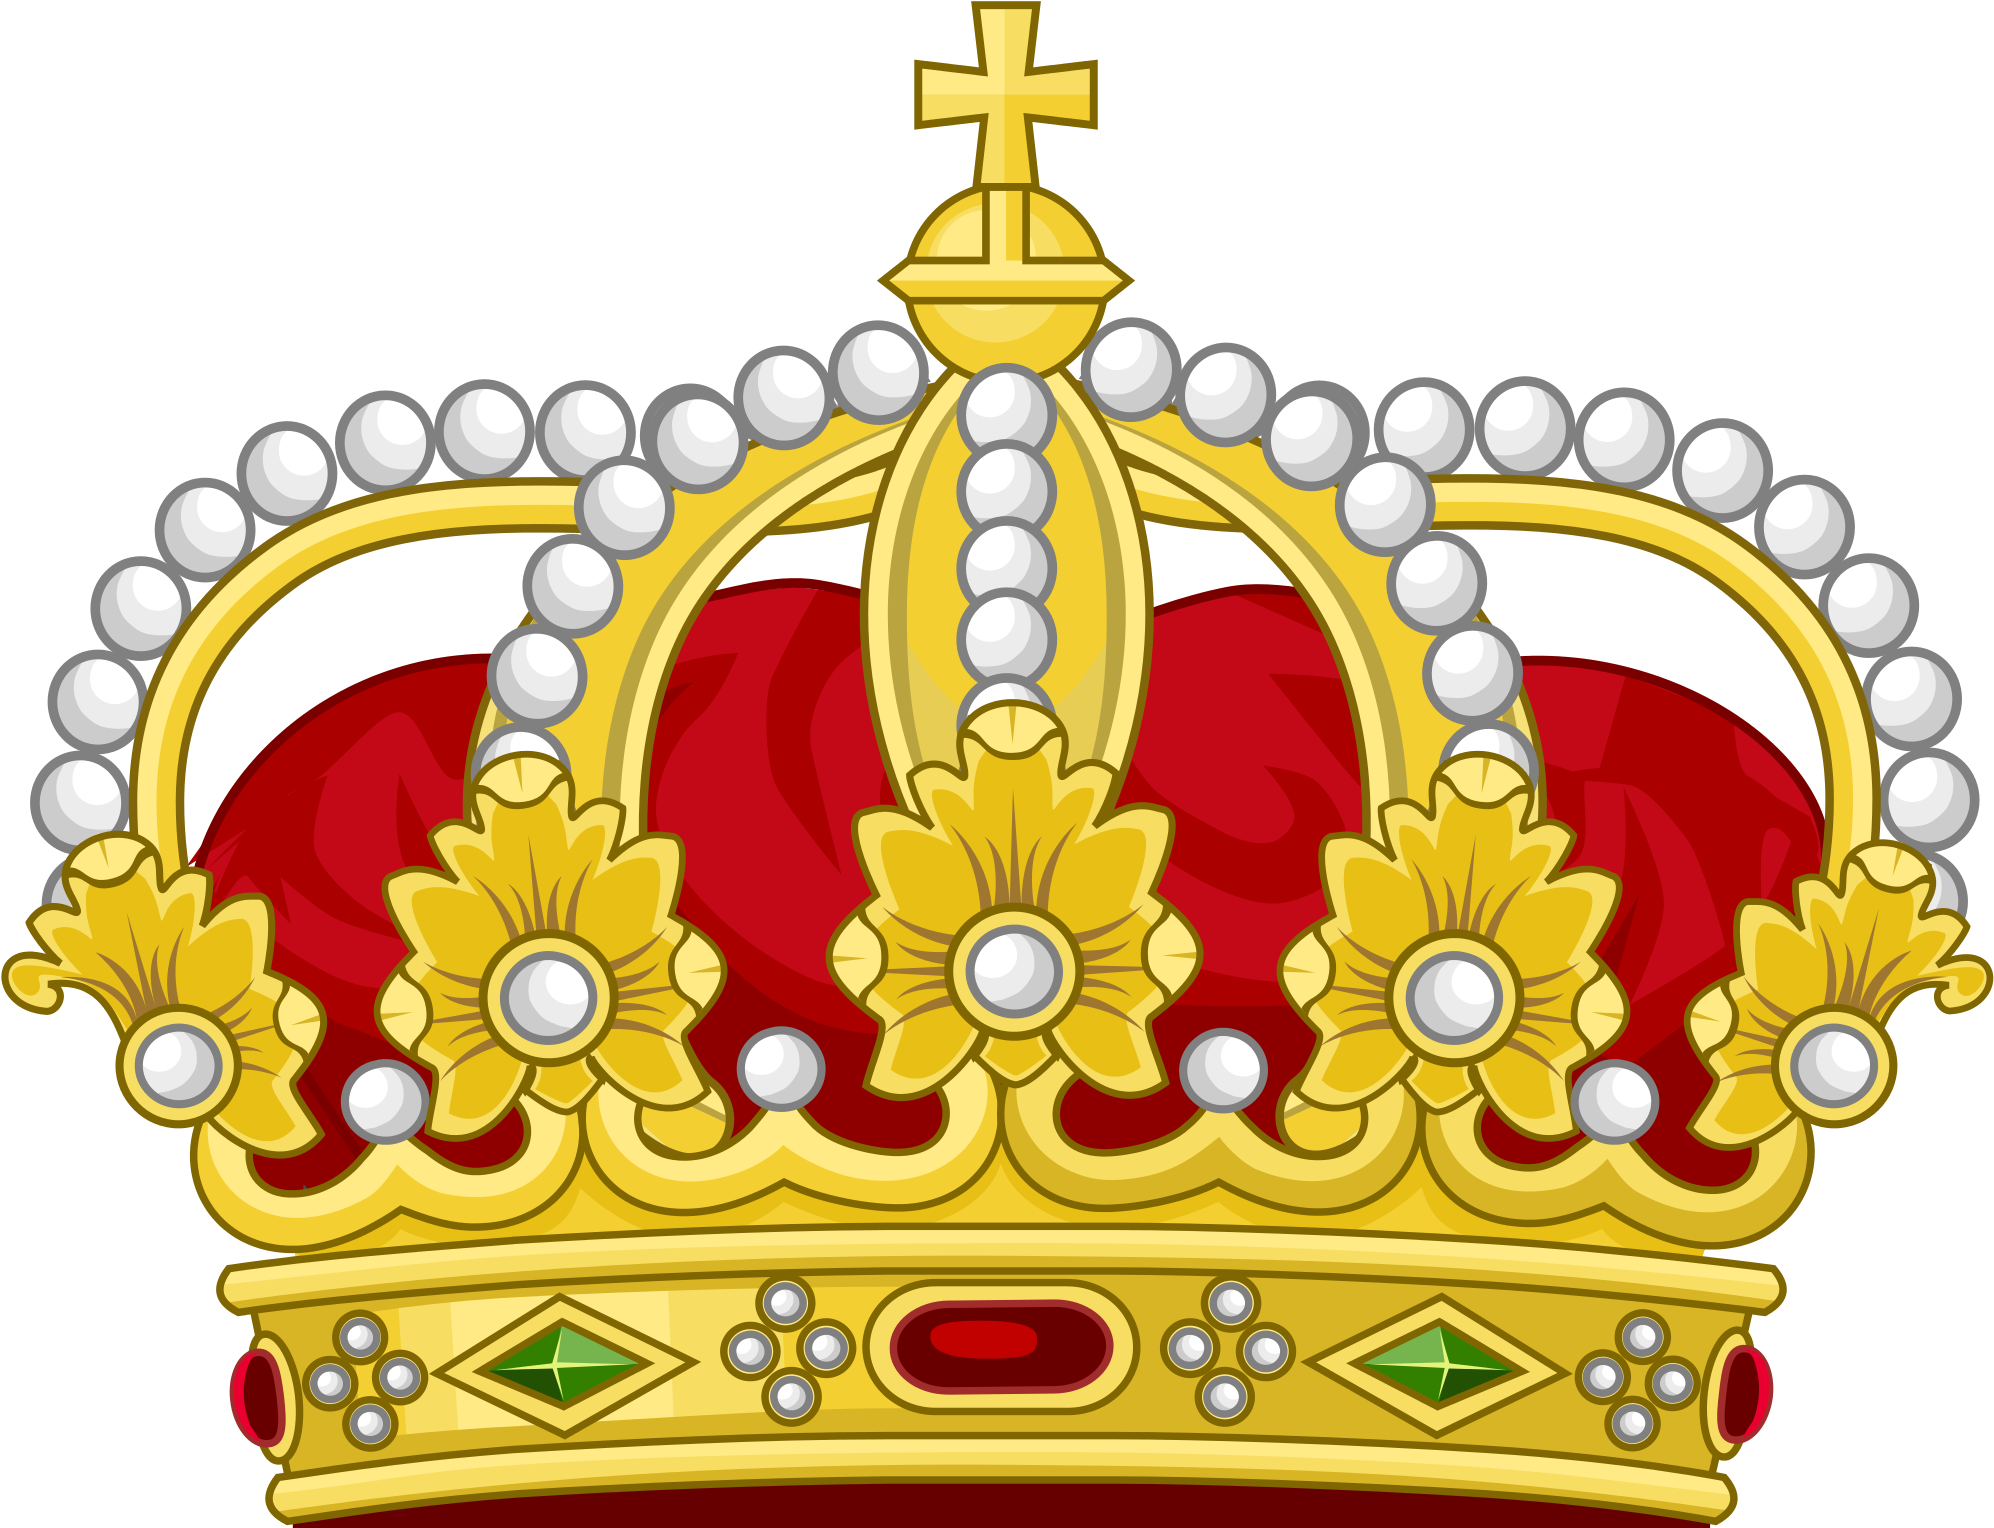 Heraldic Royal Crown Of The King Of The Romans - King Crown Clipart (2000x1529)